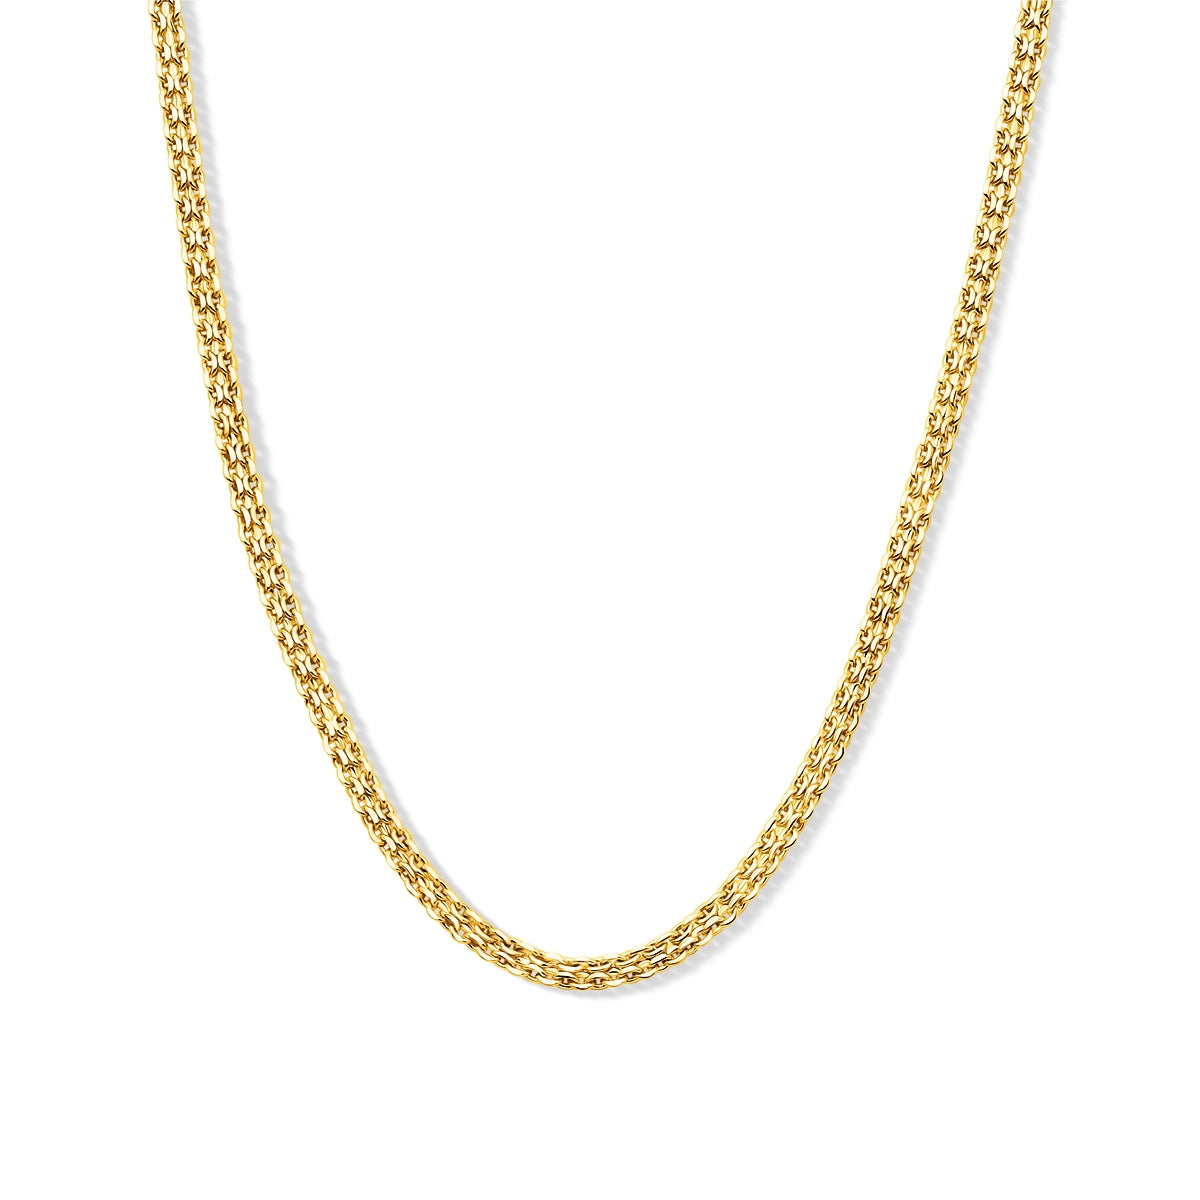 Simple gold plated chain necklace